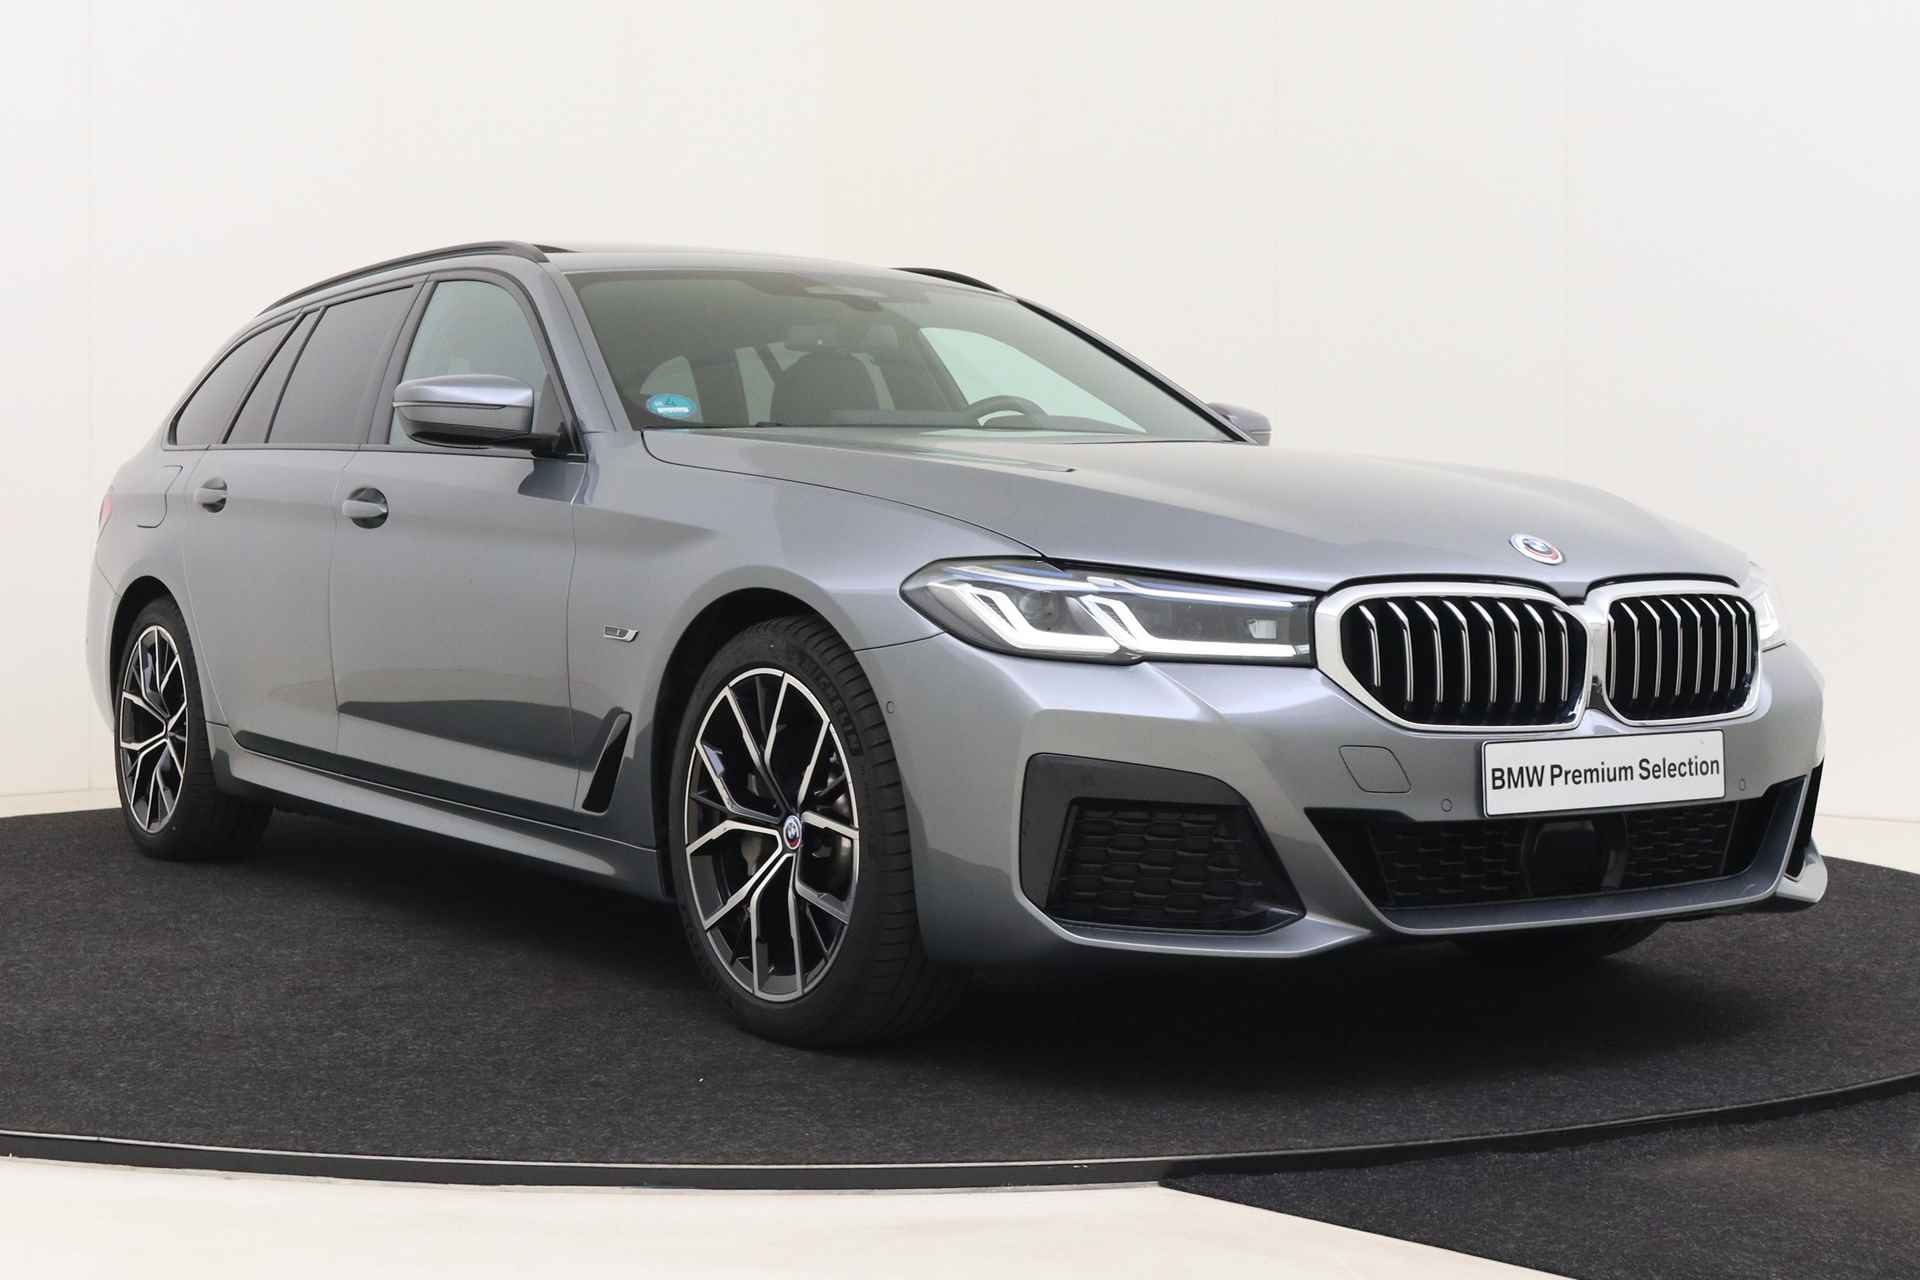 BMW 5 Serie Touring 530e High Executive M Sport Automaat / BMW M 50 Jahre uitvoering / Panoramadak / Laserlight / Driving Assistant Professional / Head-Up / Adaptief onderstel / Comfort Access - 14/76